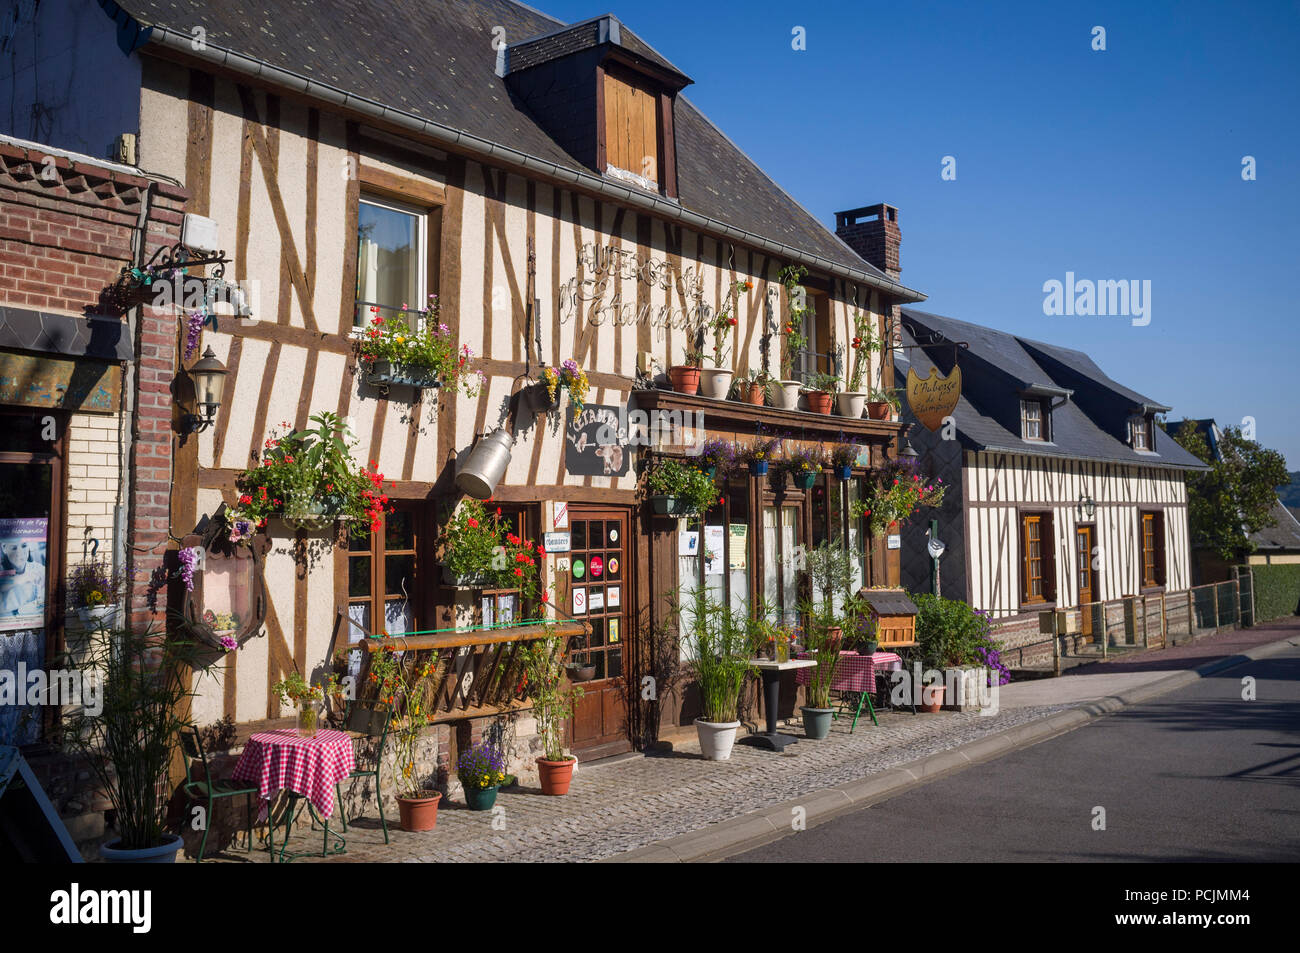 Traditional half-timbered hotel in the village of Marais Vernier, Normandy, France, decorated with pots and hanging baskets of geraniums Stock Photo